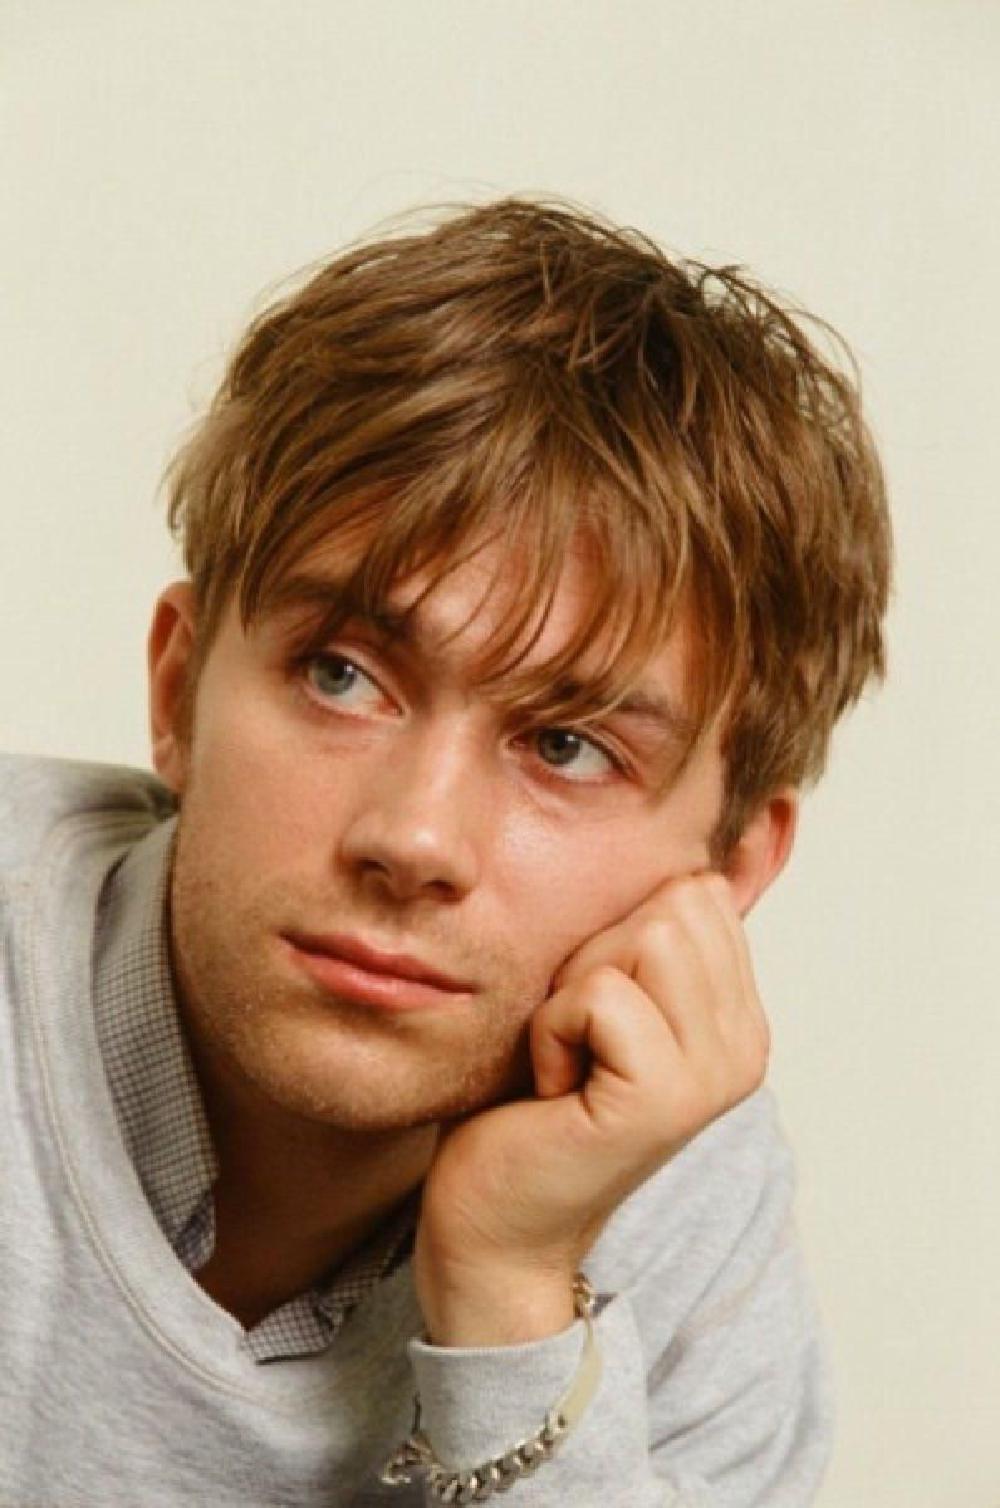 Damon albarn in a shop, in front of the magazine rack, saying: and here you have your culture